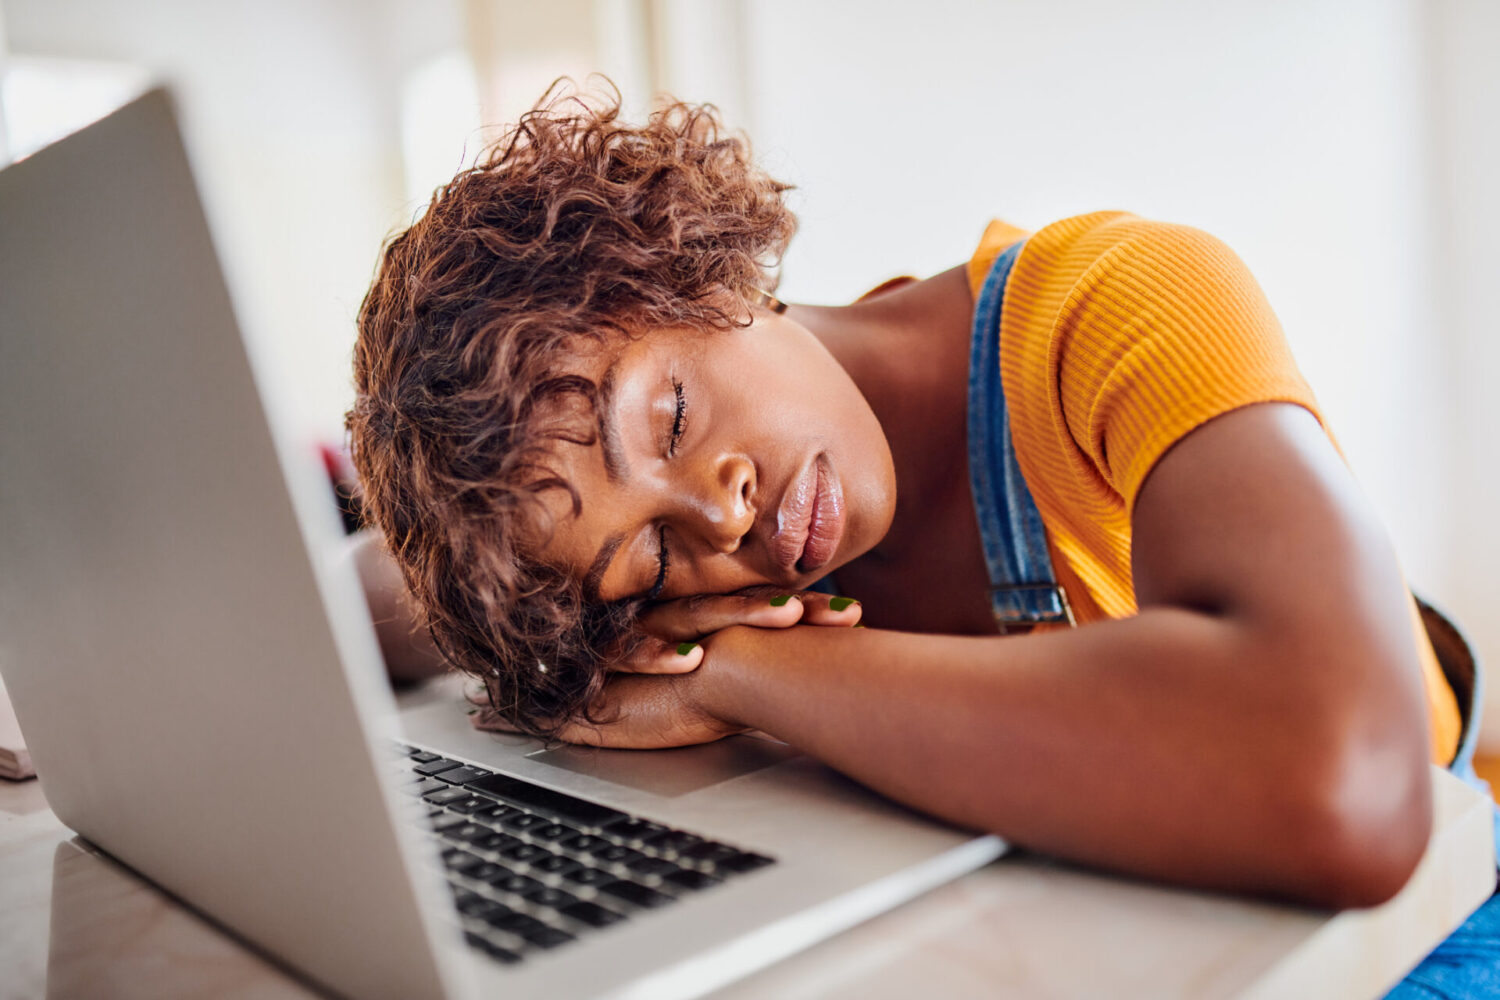 Black woman in a yellow shirt falls asleep on her laptop due to daytime sleepiness from an untreated sleep disorder